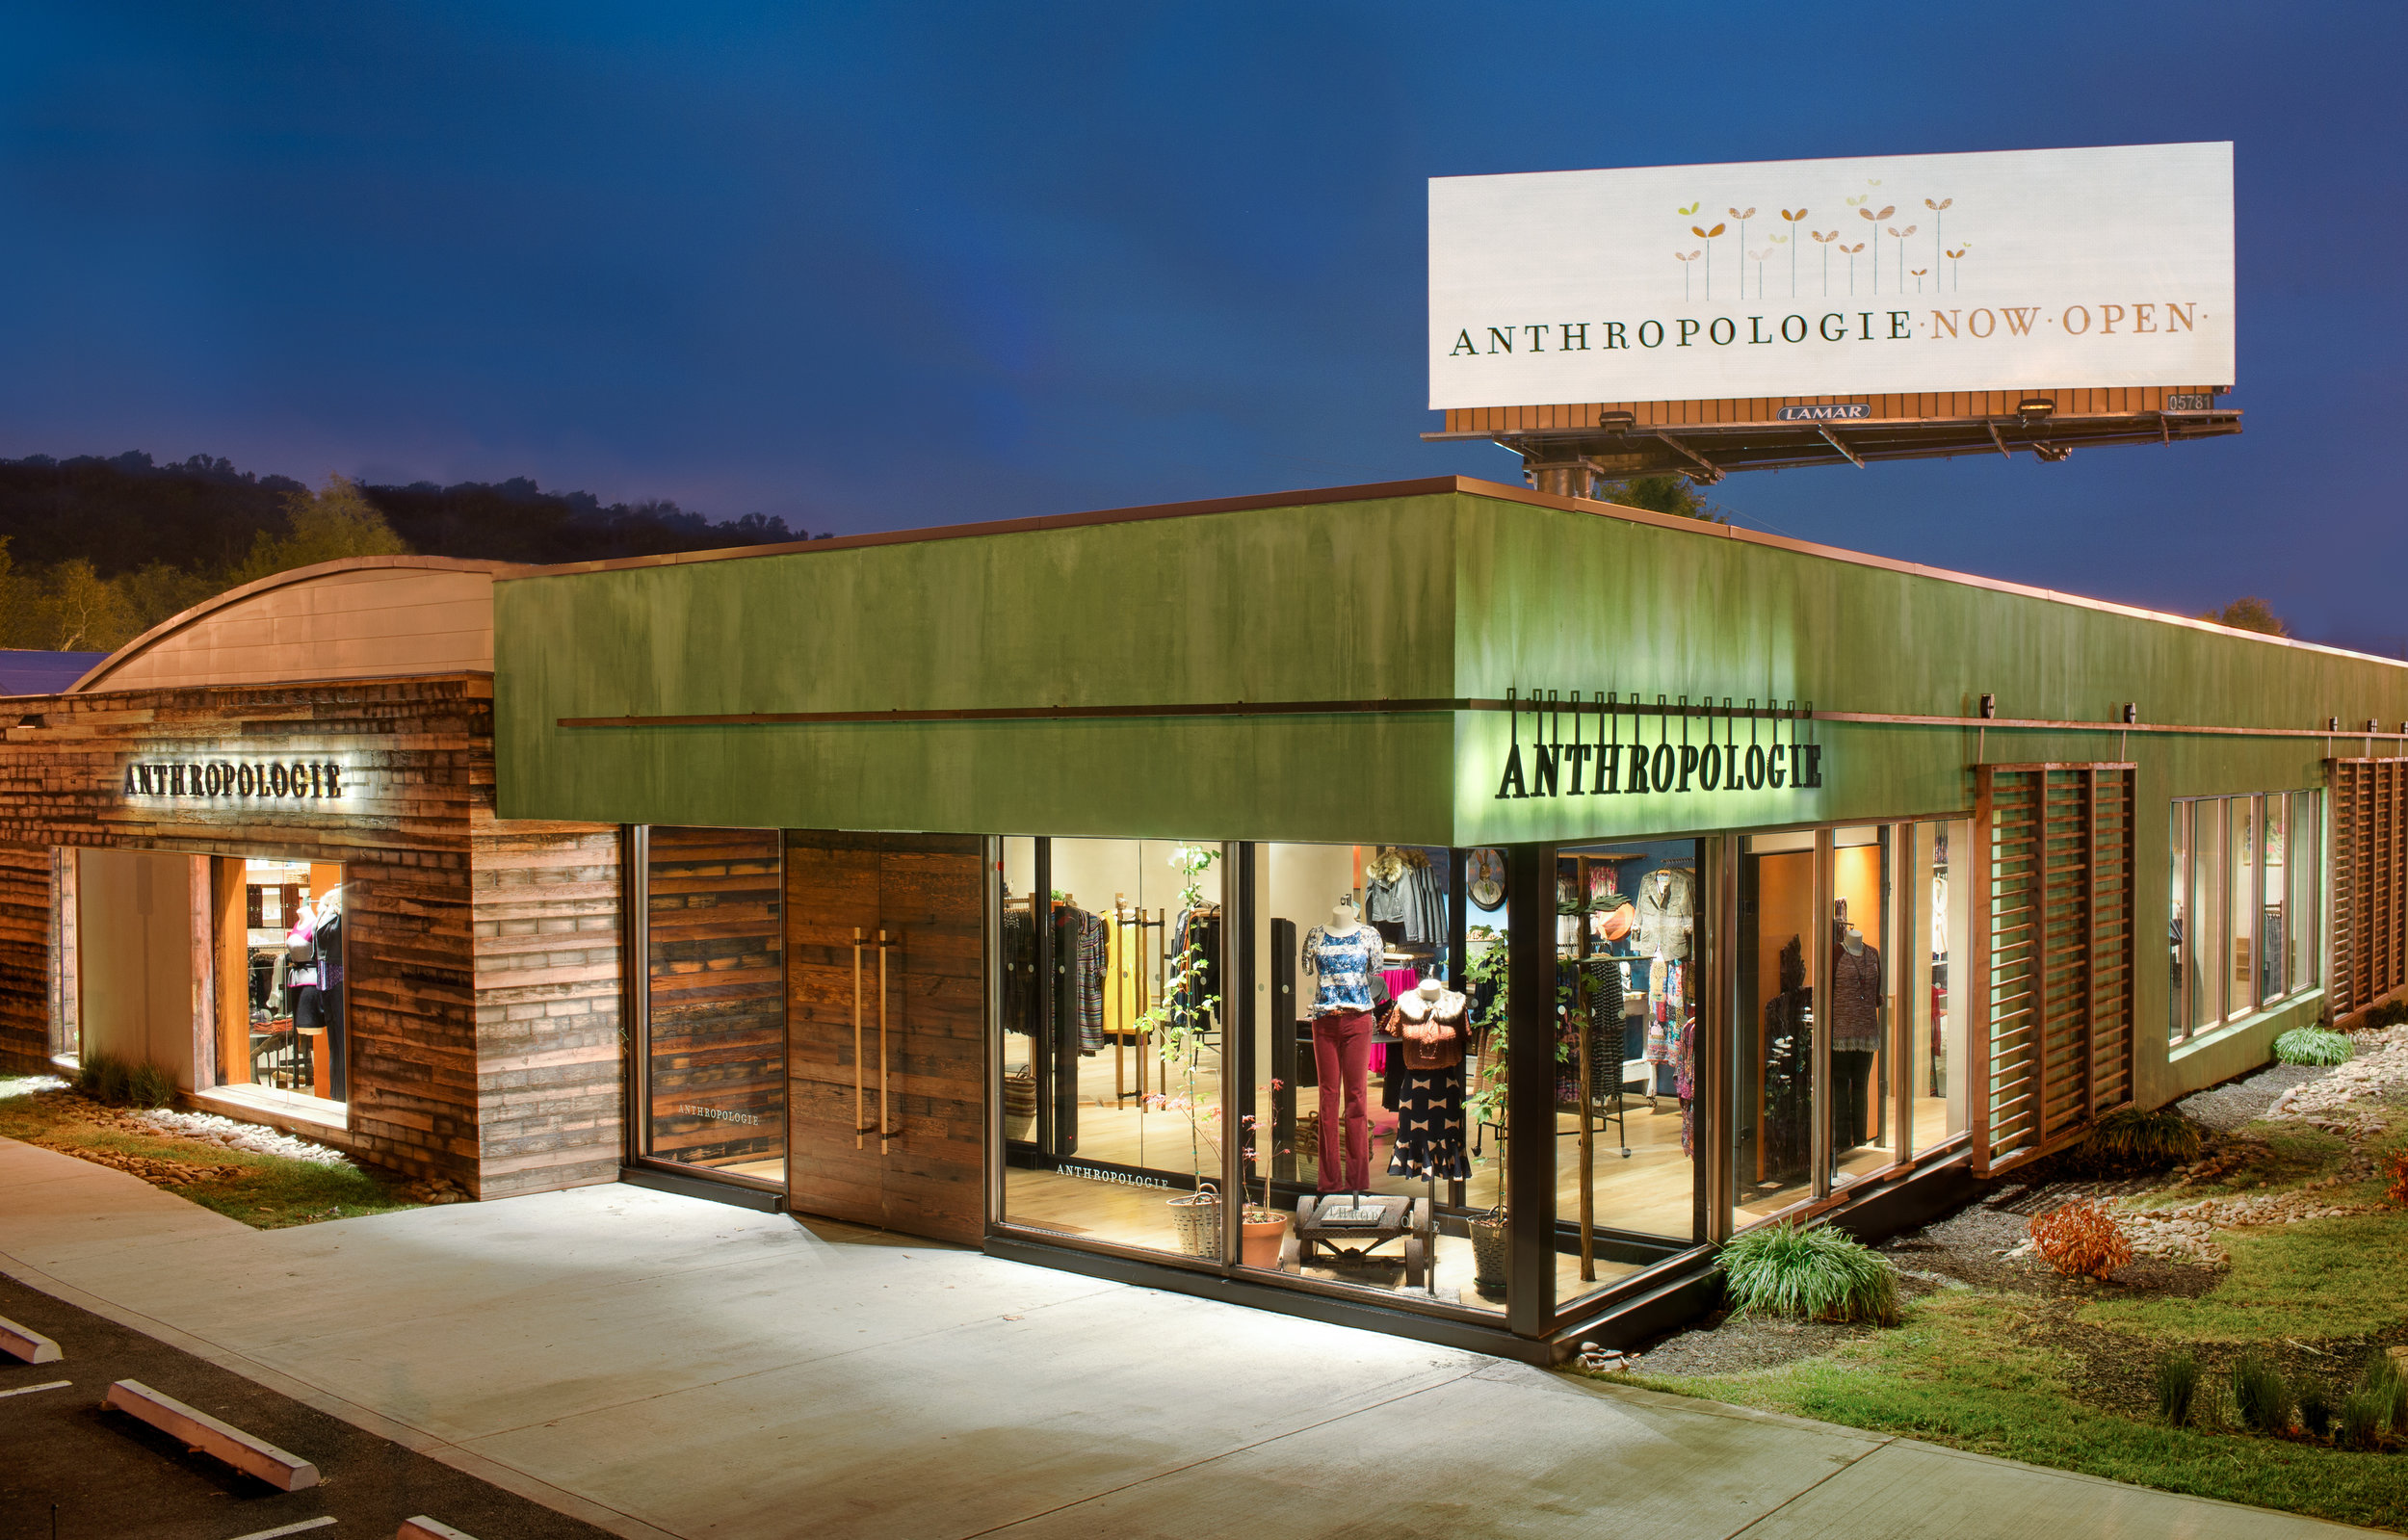 NewStudio Architecture collaborated on the adaptive reuse project for Anthropologie in Knoxville